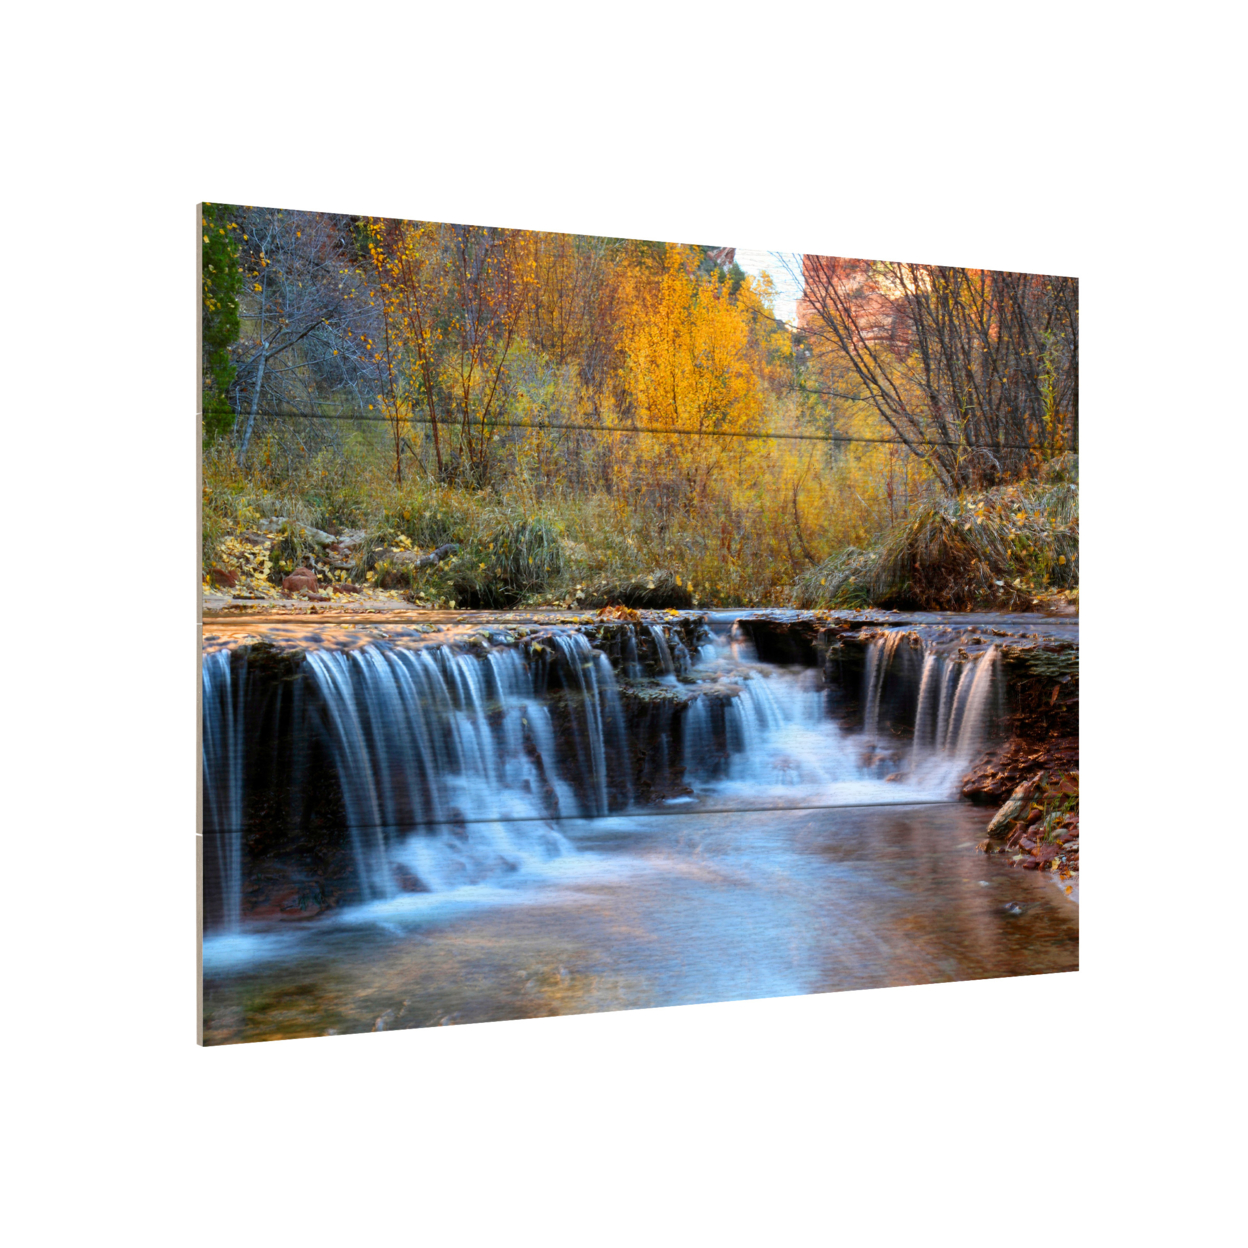 Wall Art 12 X 16 Inches Titled Zion Autumn Ready To Hang Printed On Wooden Planks